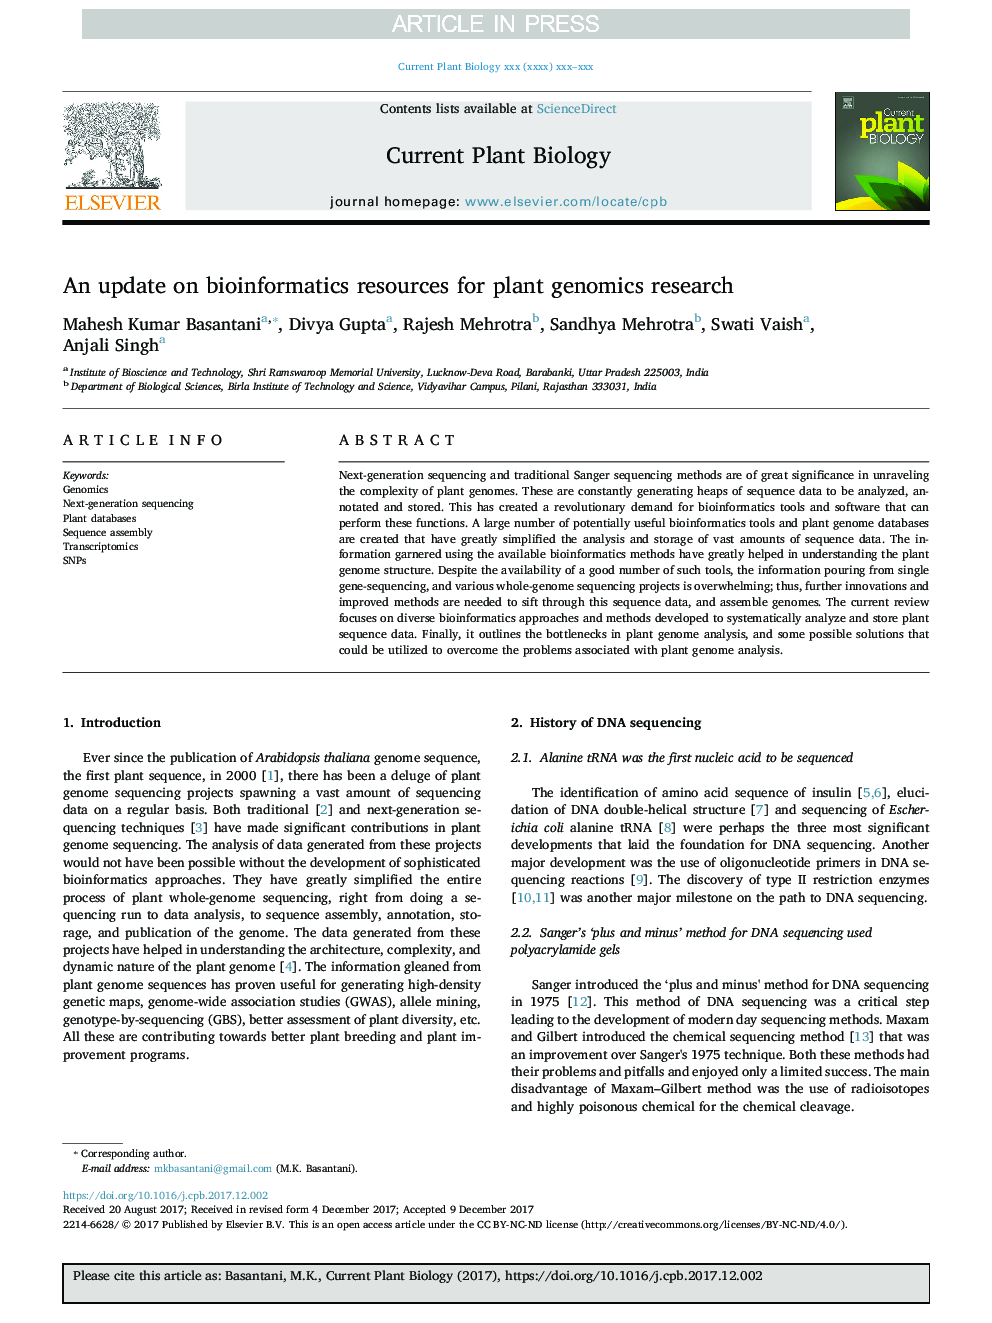 An update on bioinformatics resources for plant genomics research